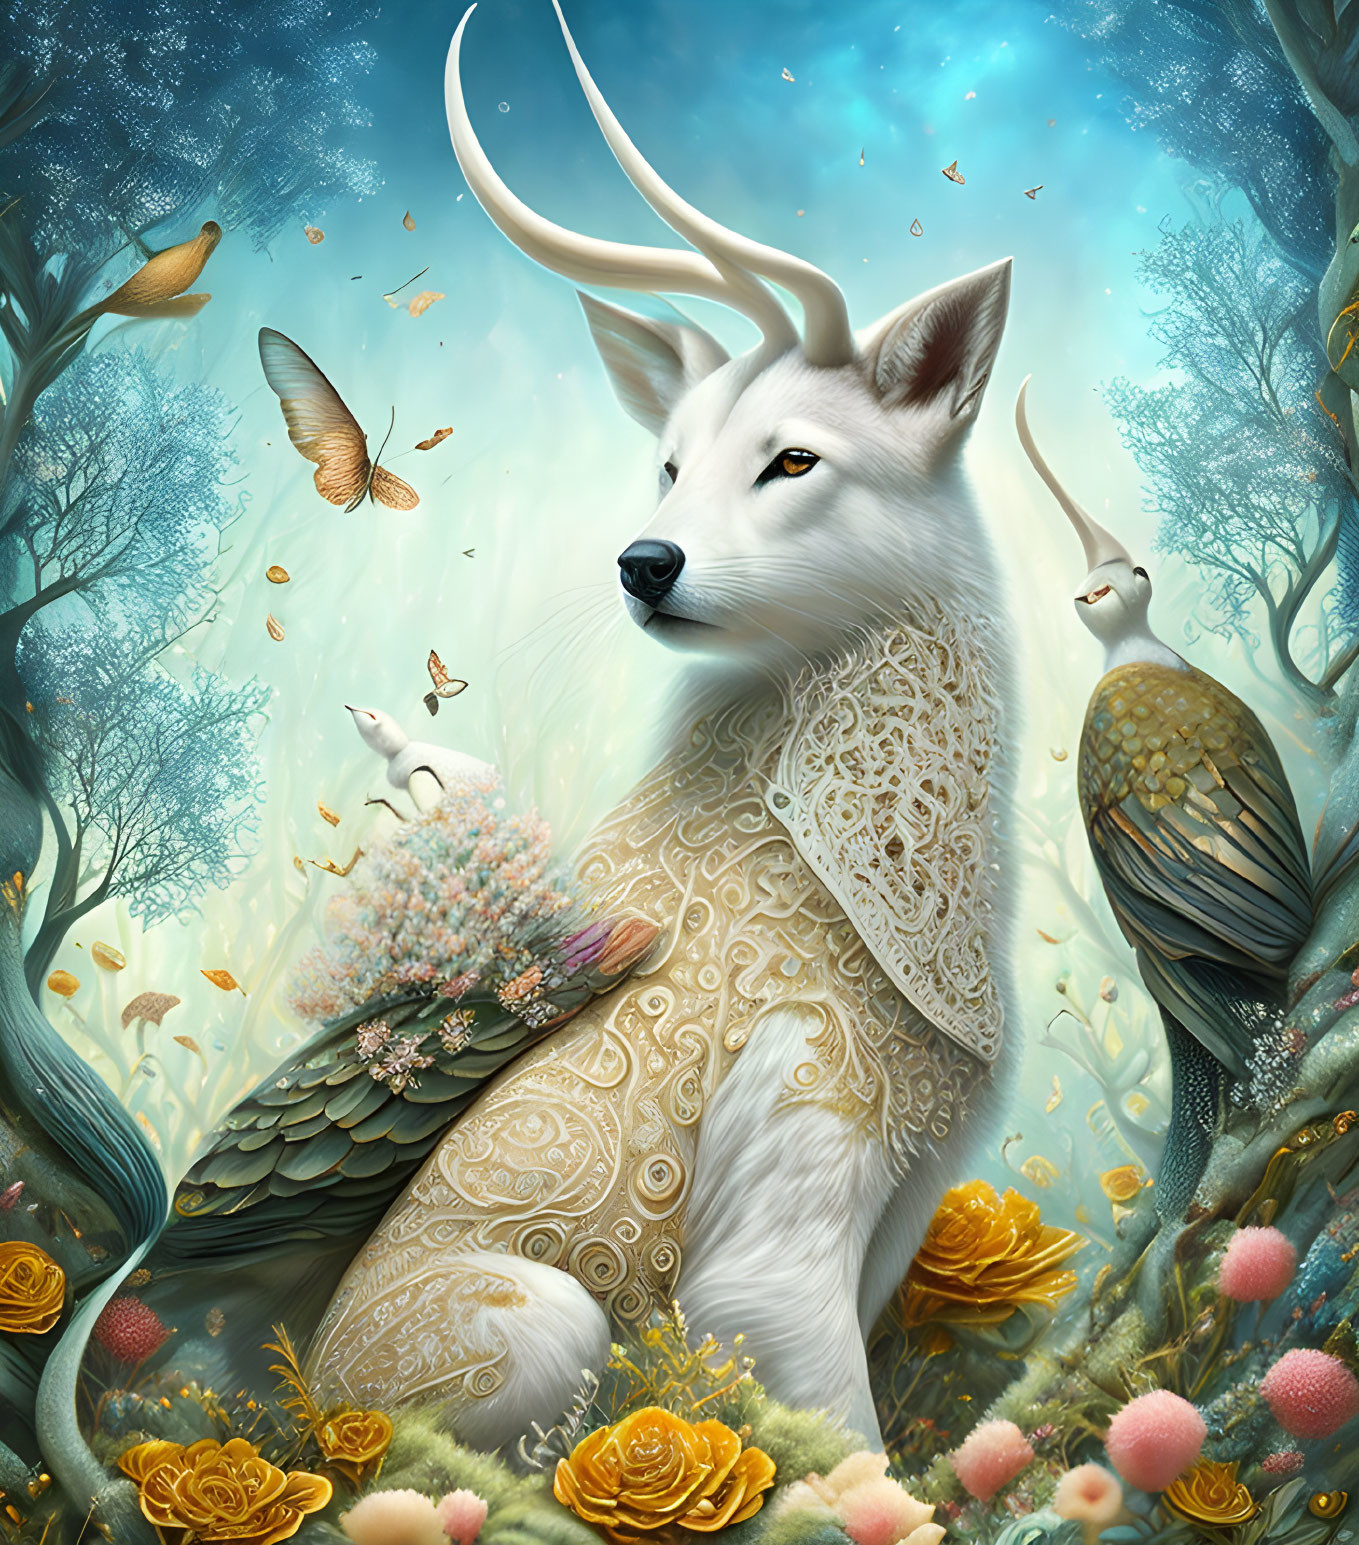 Majestic white creature with antlers, wings, and ornate fur amidst nature wildlife